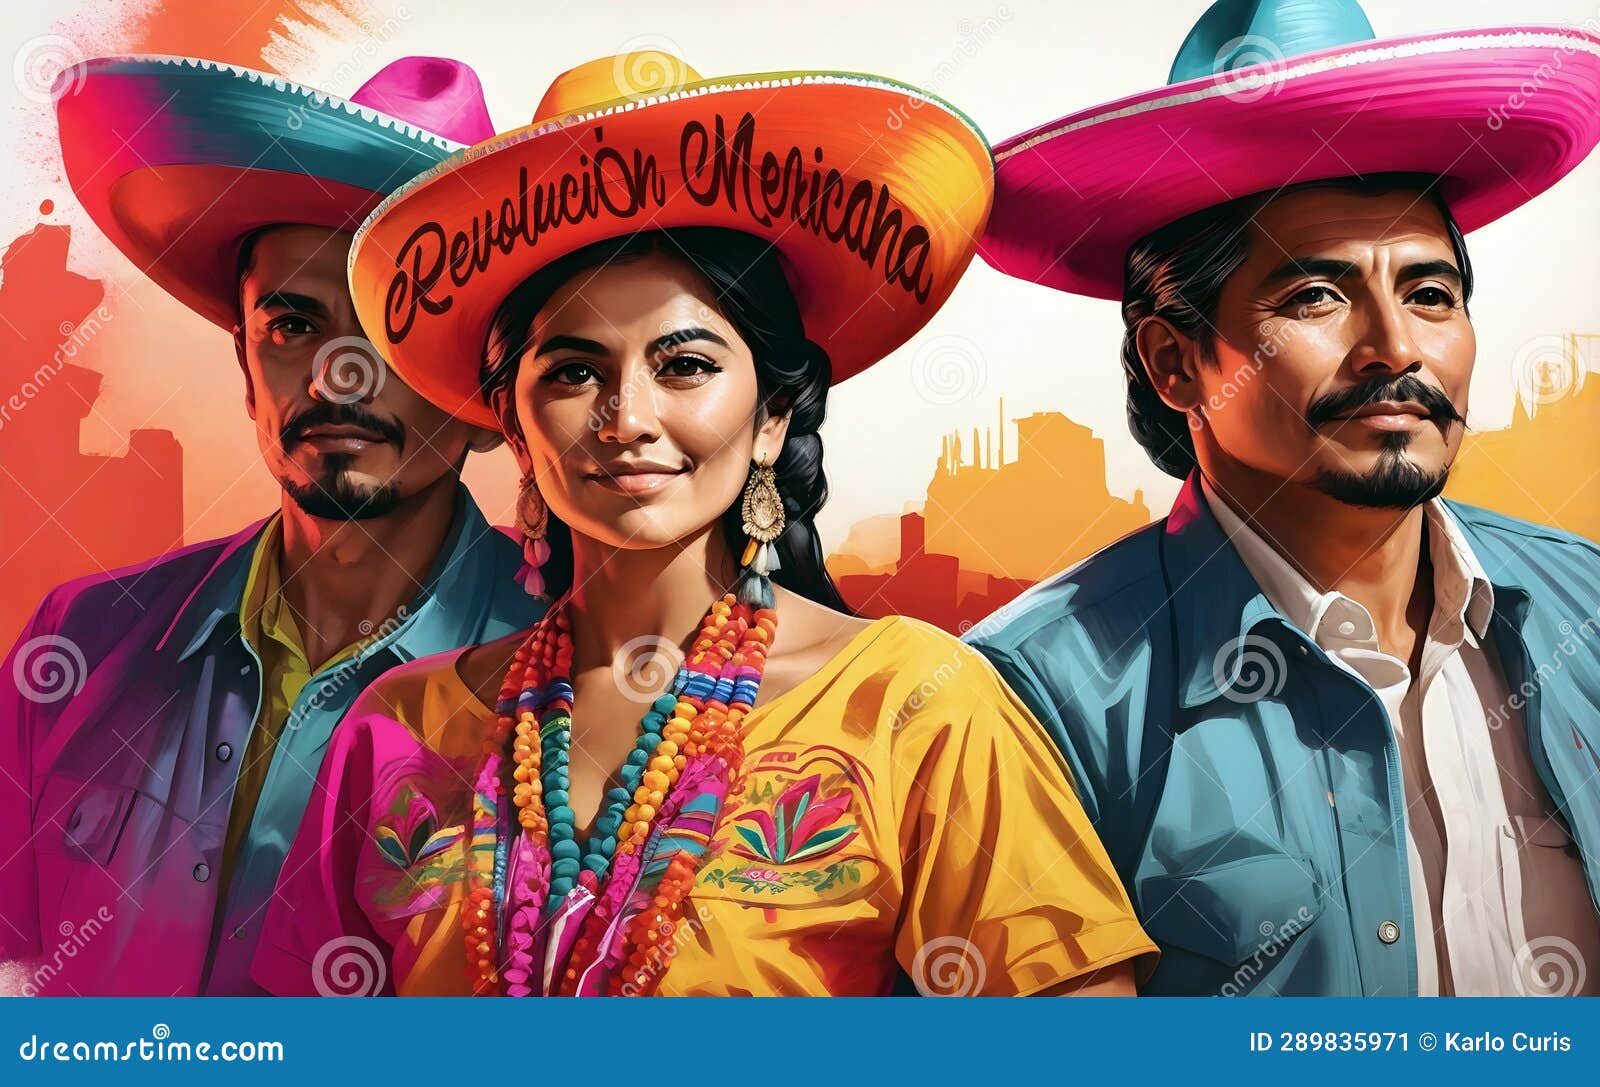 revolucion mexicana, revolucion of mexico, happy mexicans background, banner with copy space text,